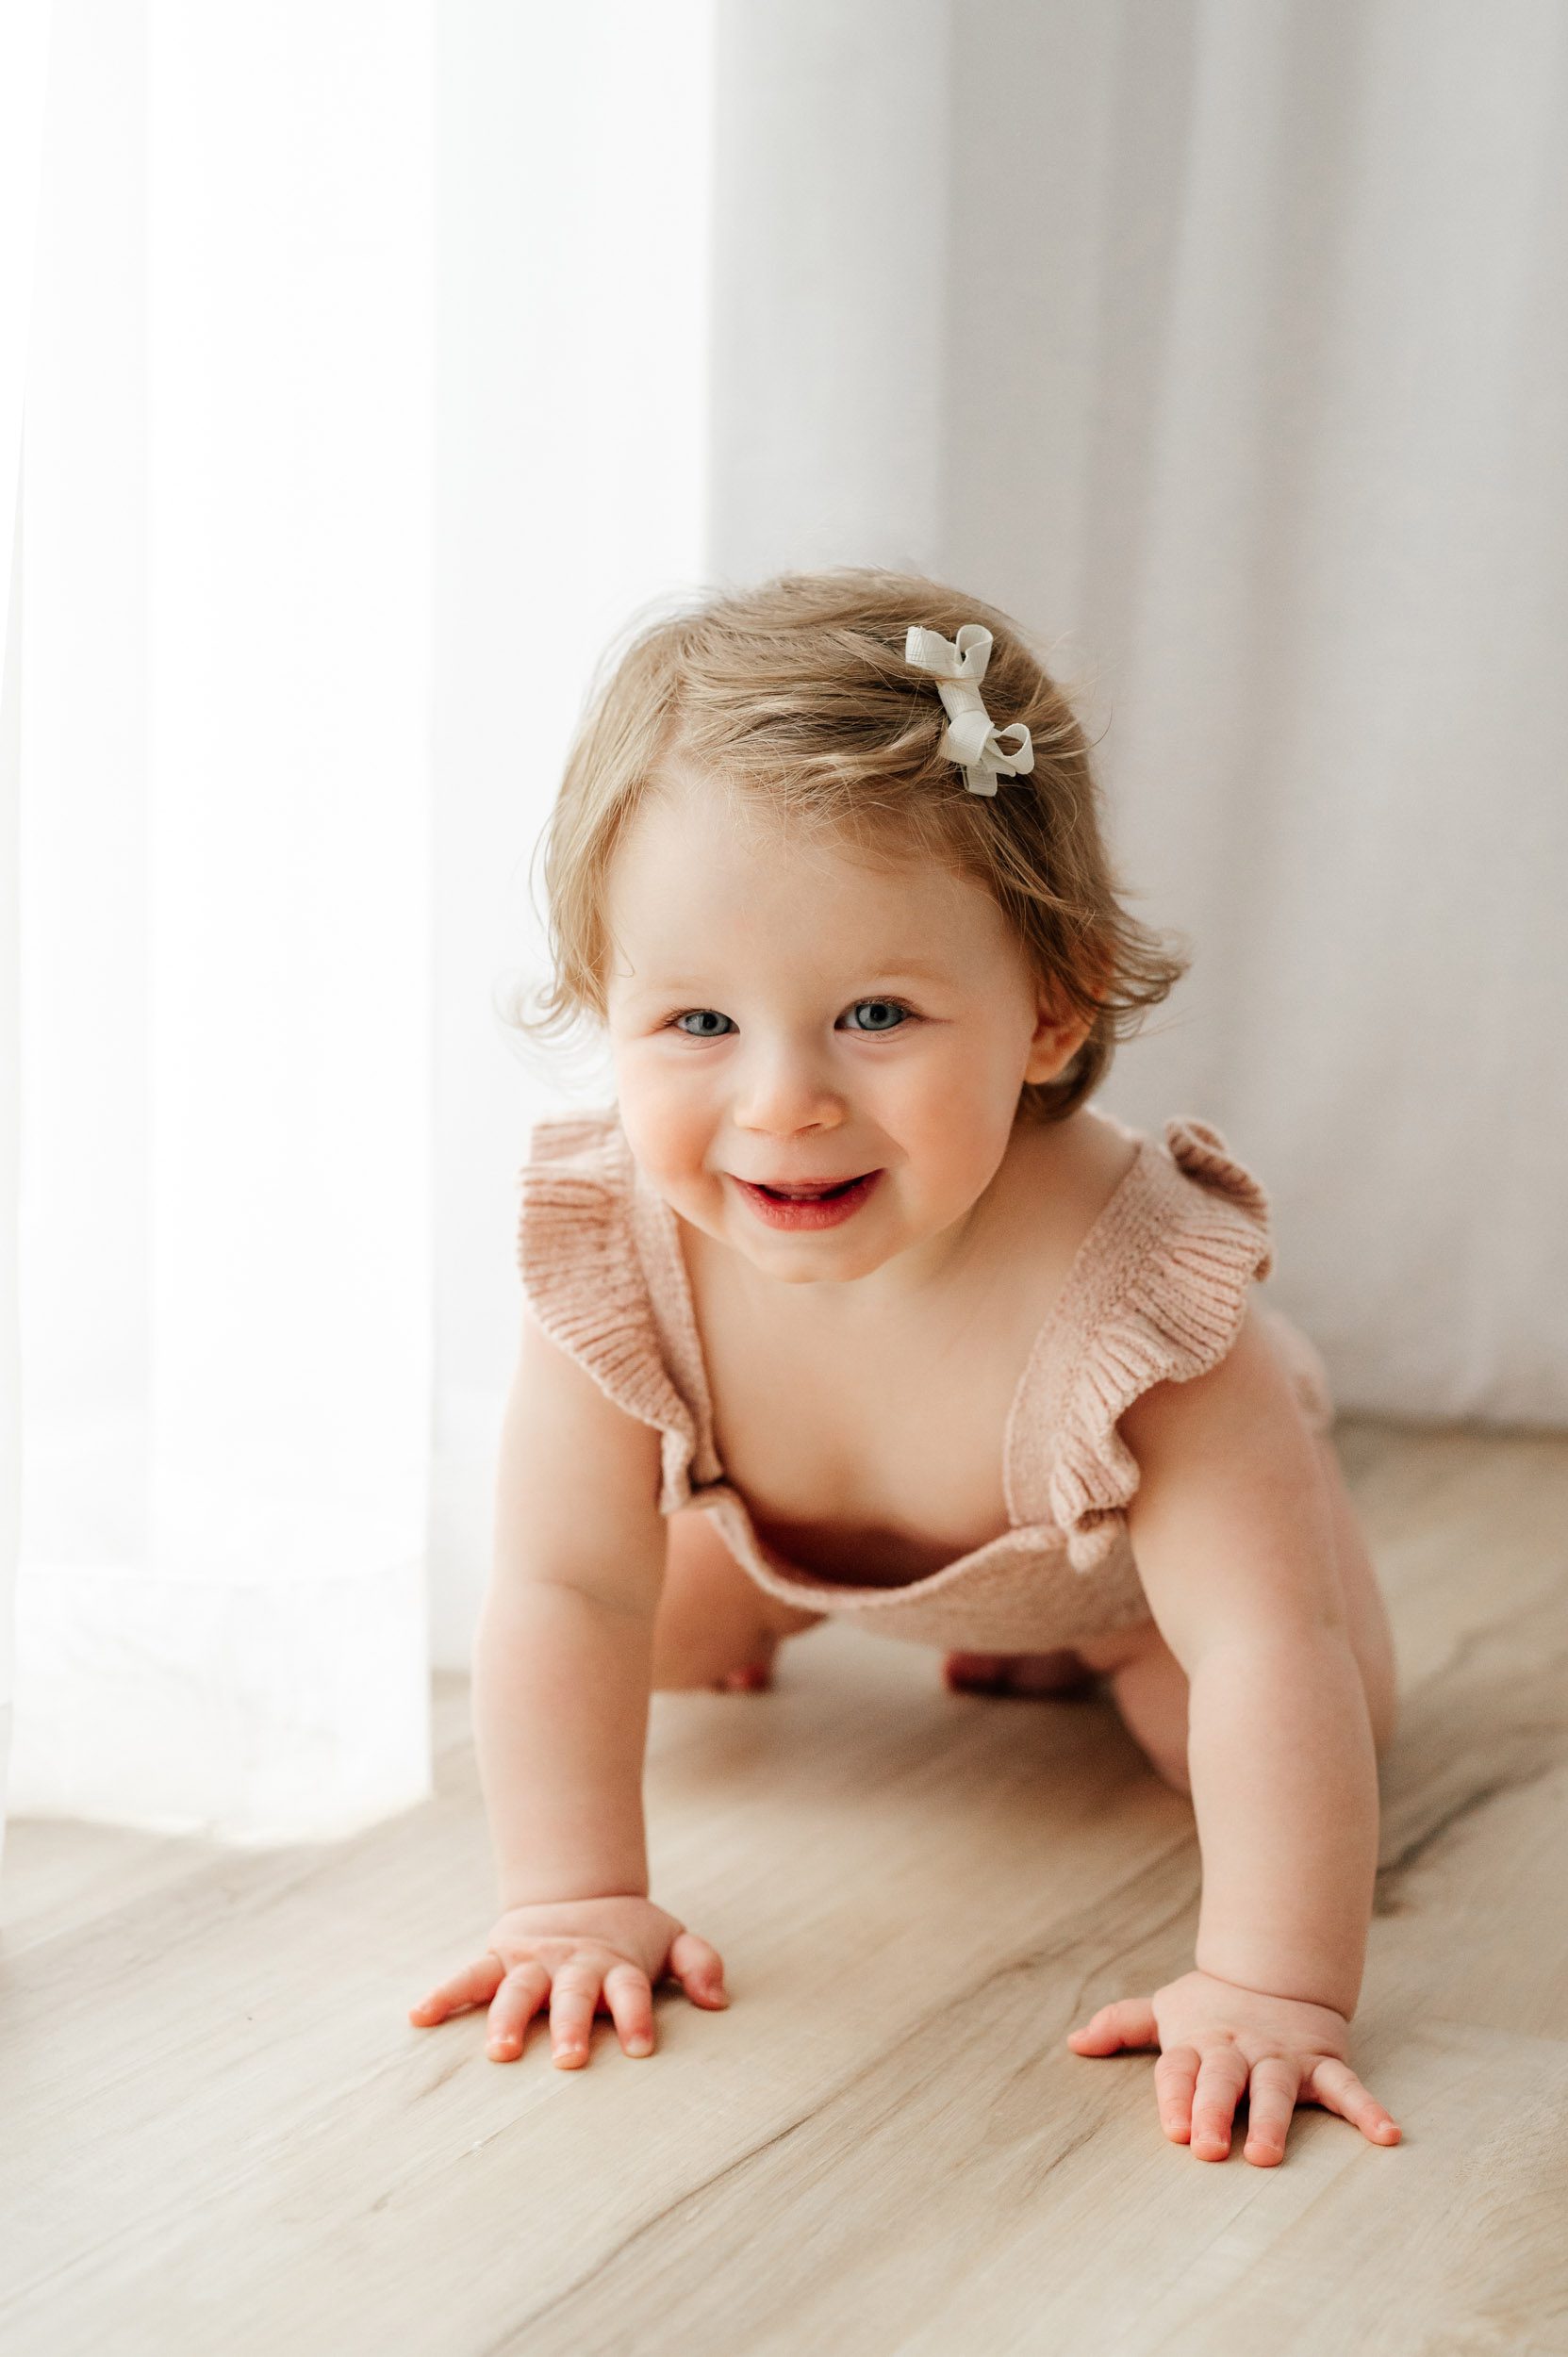 a young girl crawling on the floor next to window covered in sheer curtains and looking at the camera with a huge smile on her face during a milestone photoshoot